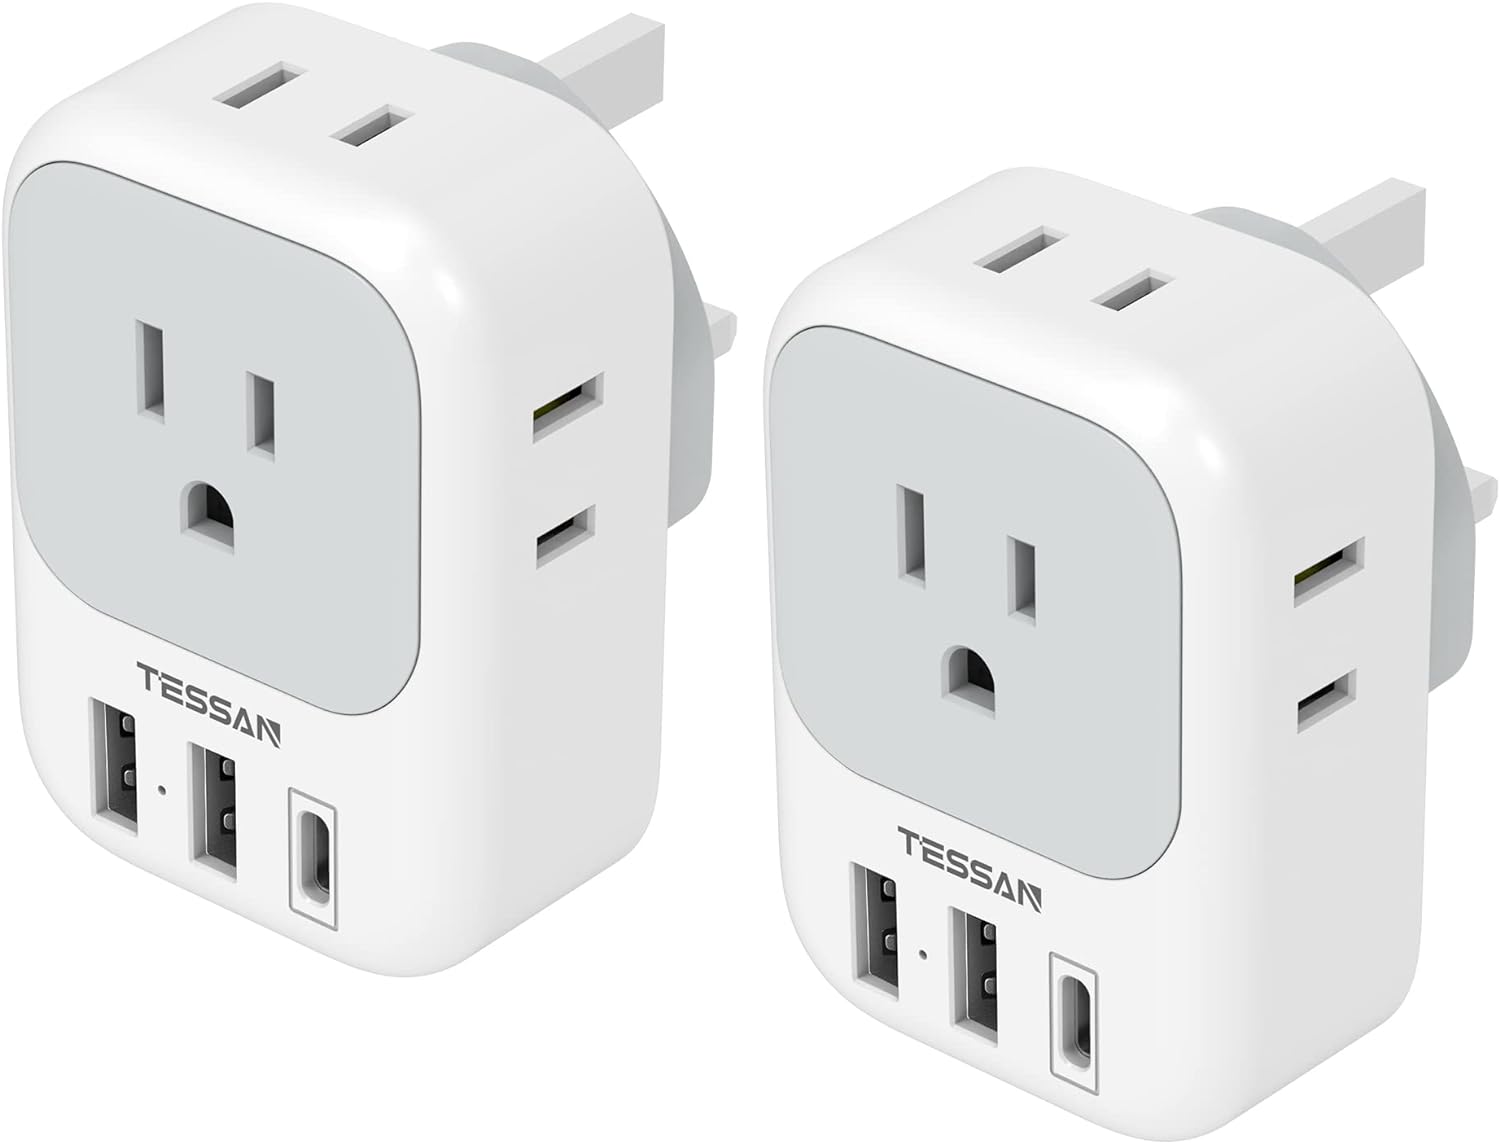 Will allow multiple devices on a single plug. I understand it works for Israel too. Very effective and a bargain at the price.